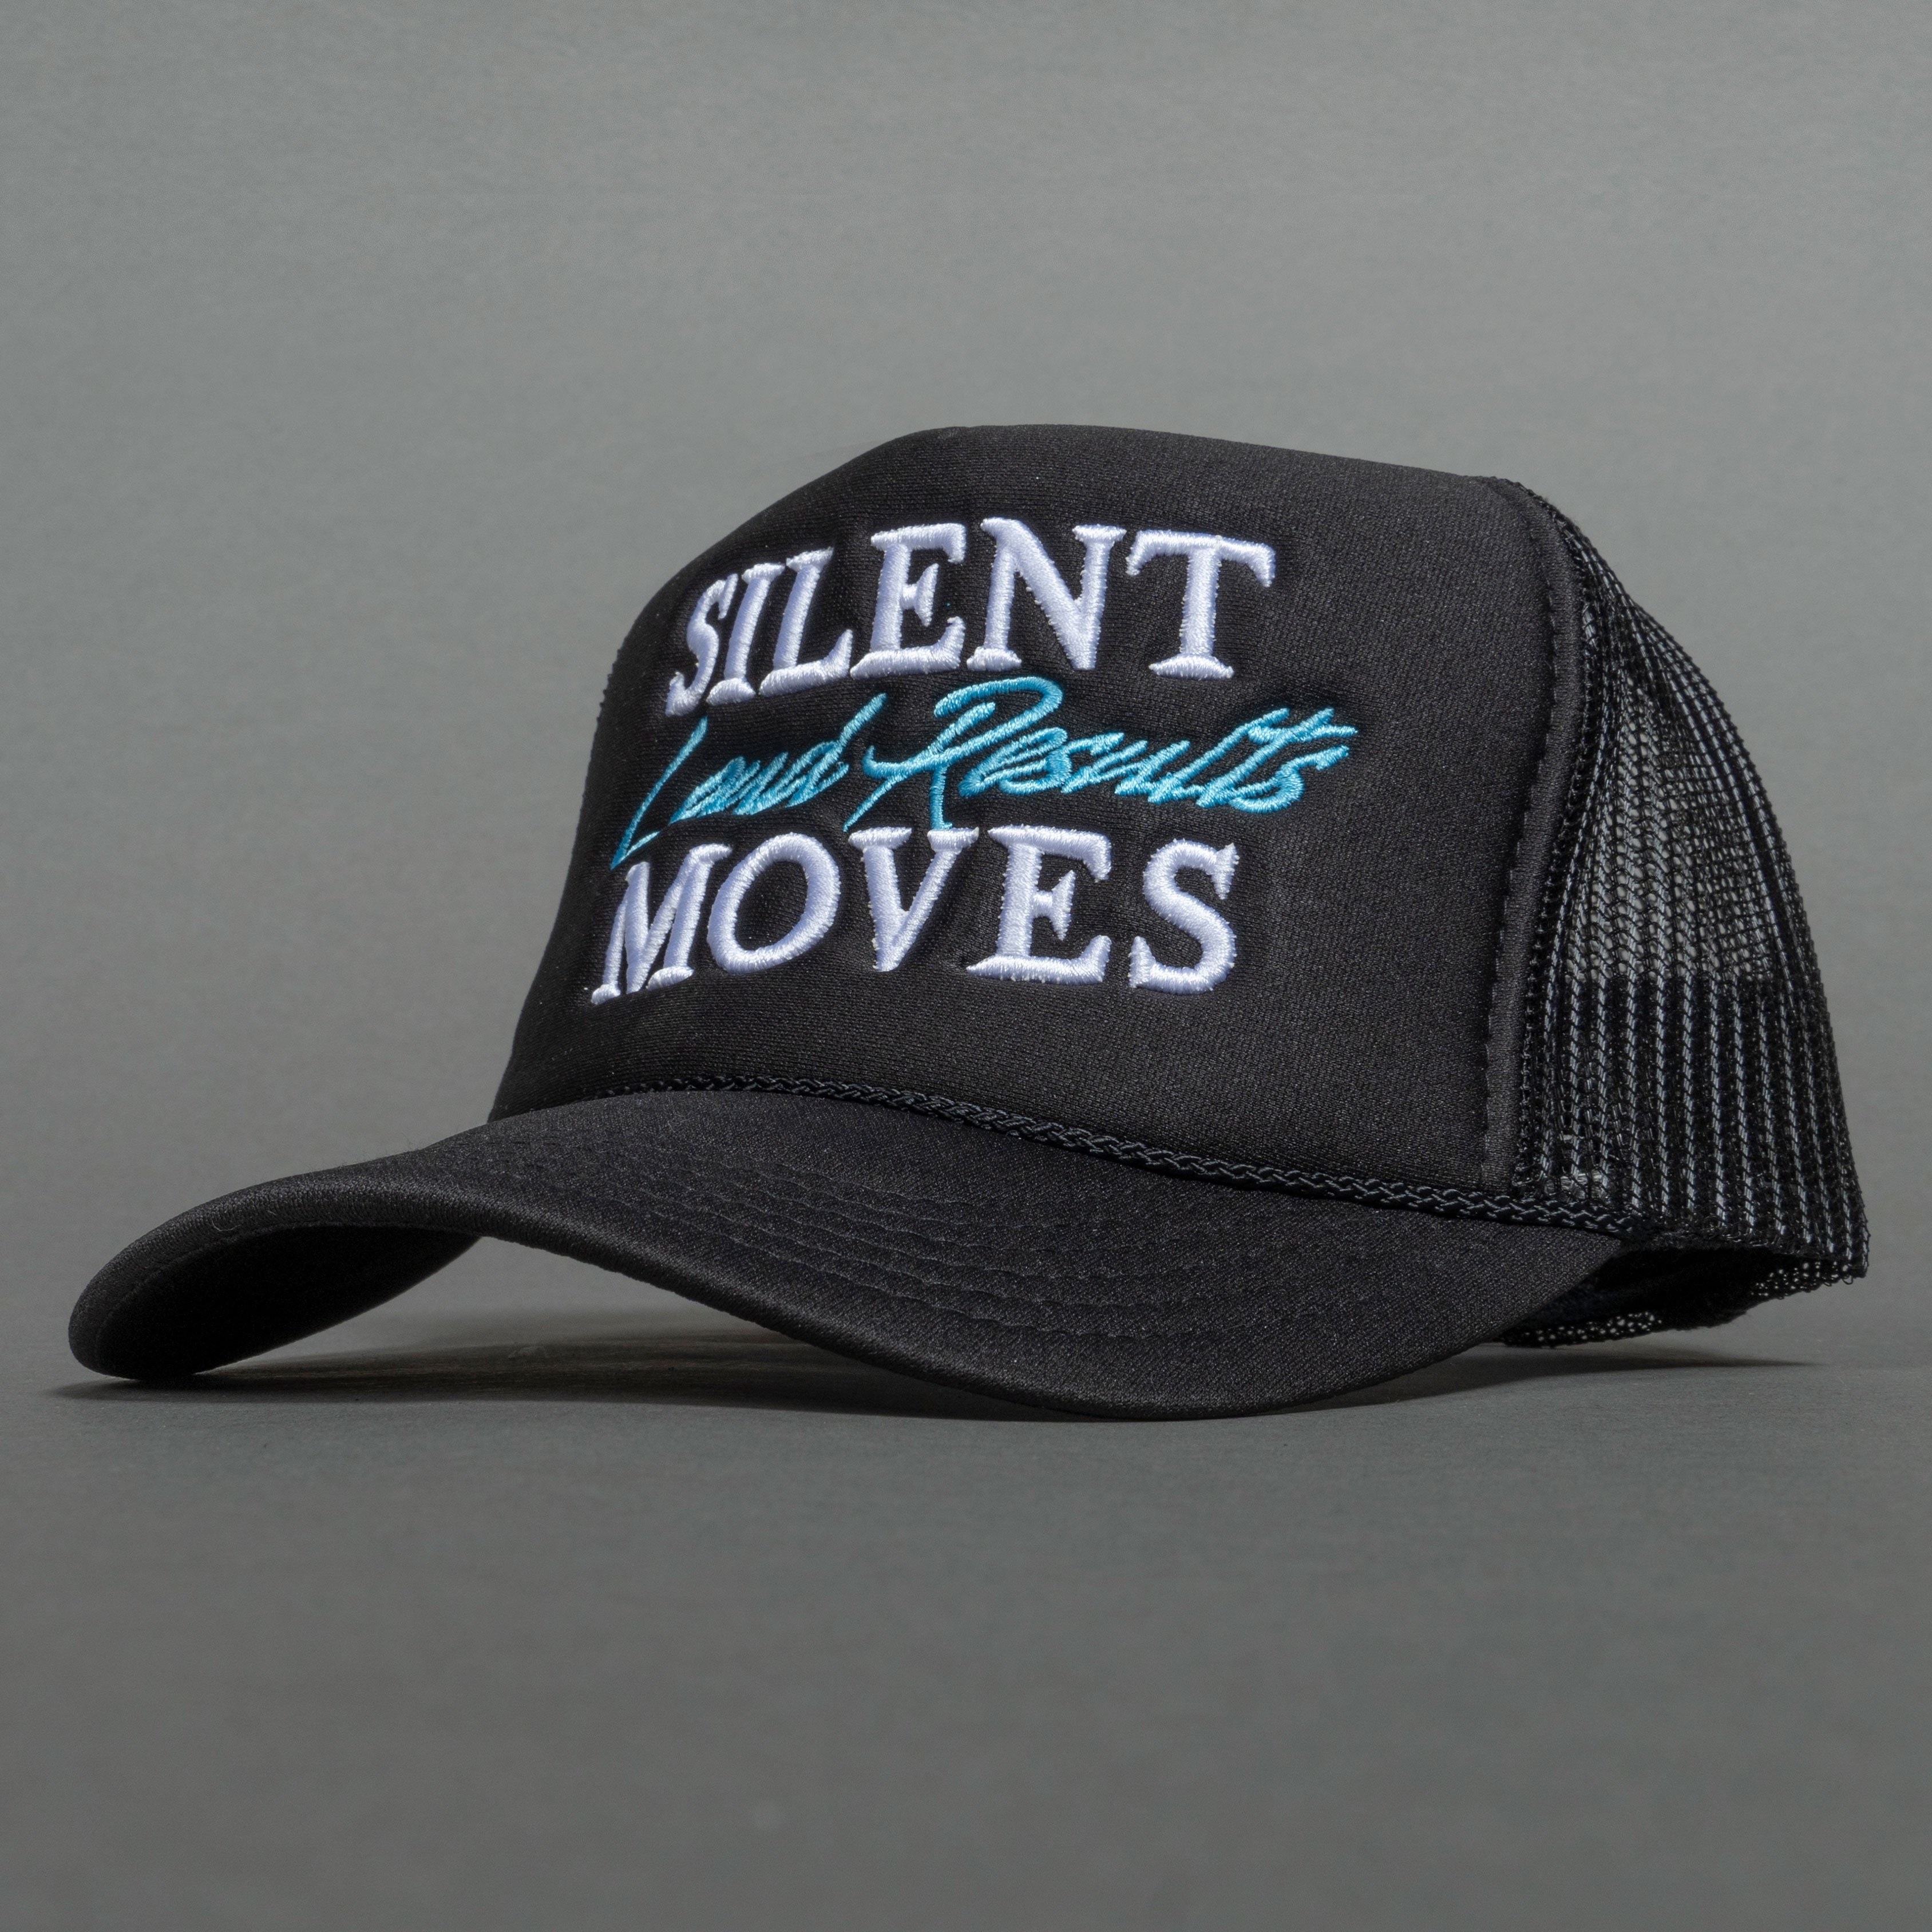 Silent Moves Loud Results Trucker Hat